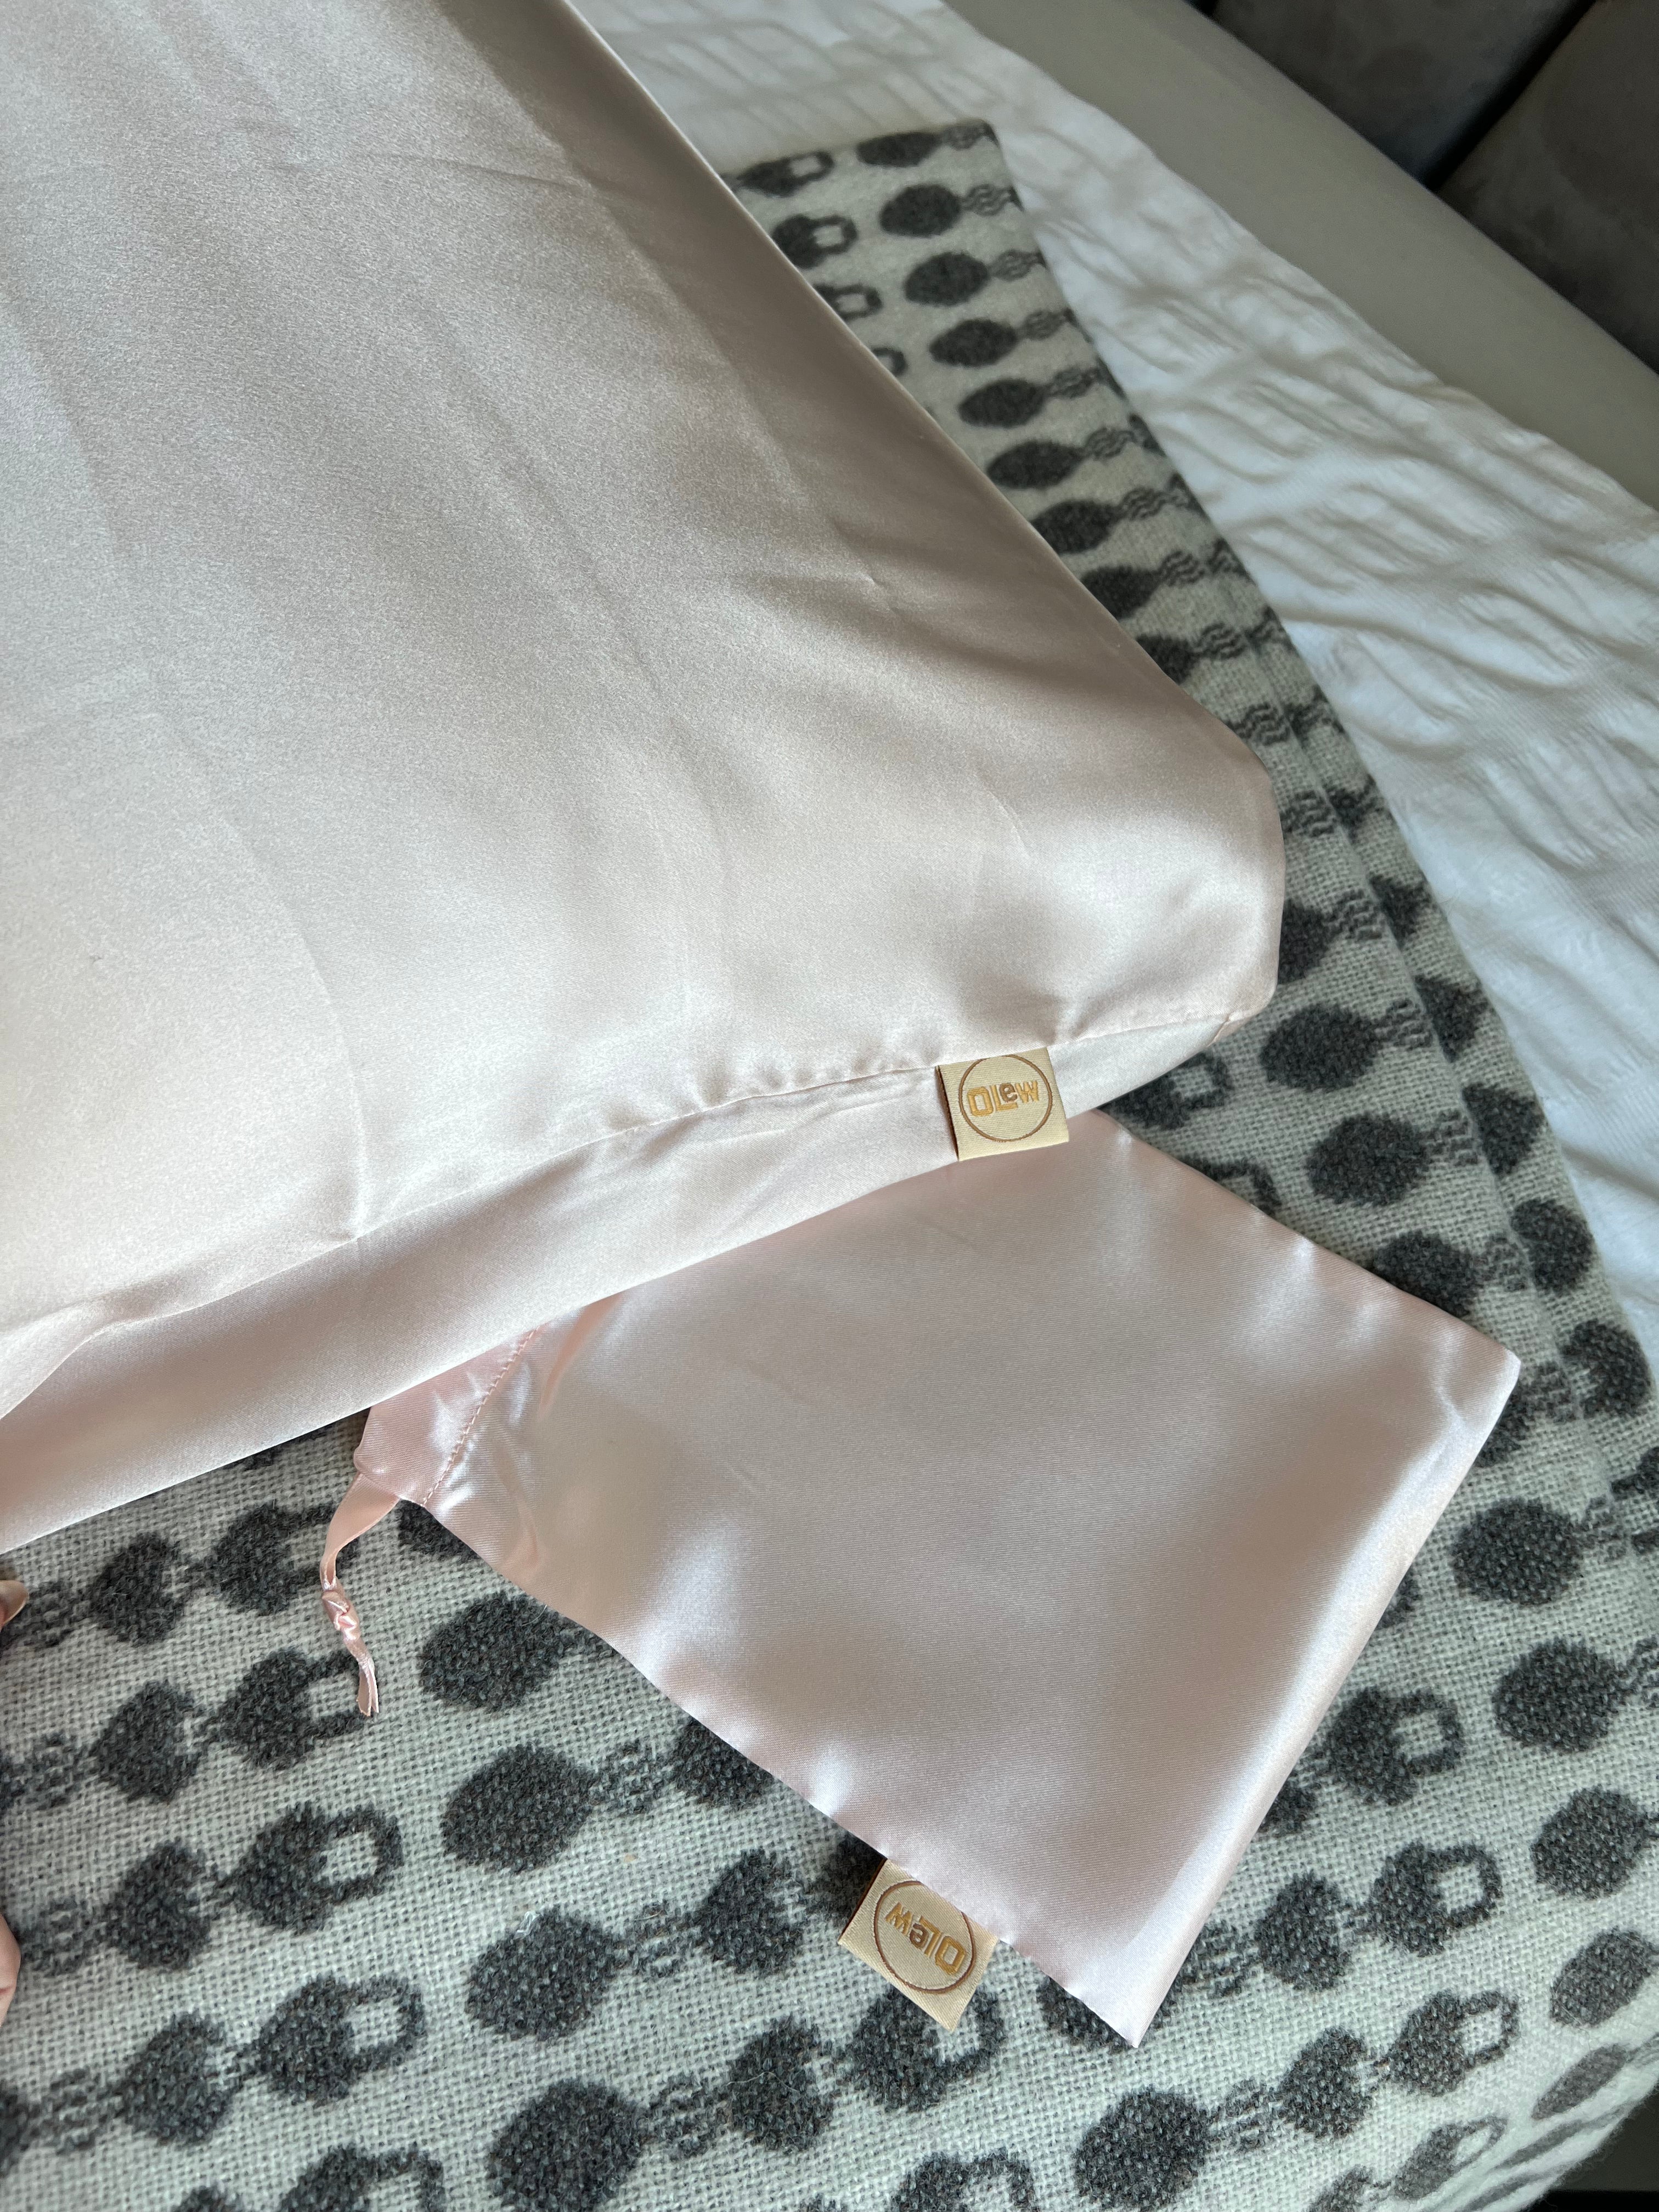 NEW Silk pillowcase with travel bag!